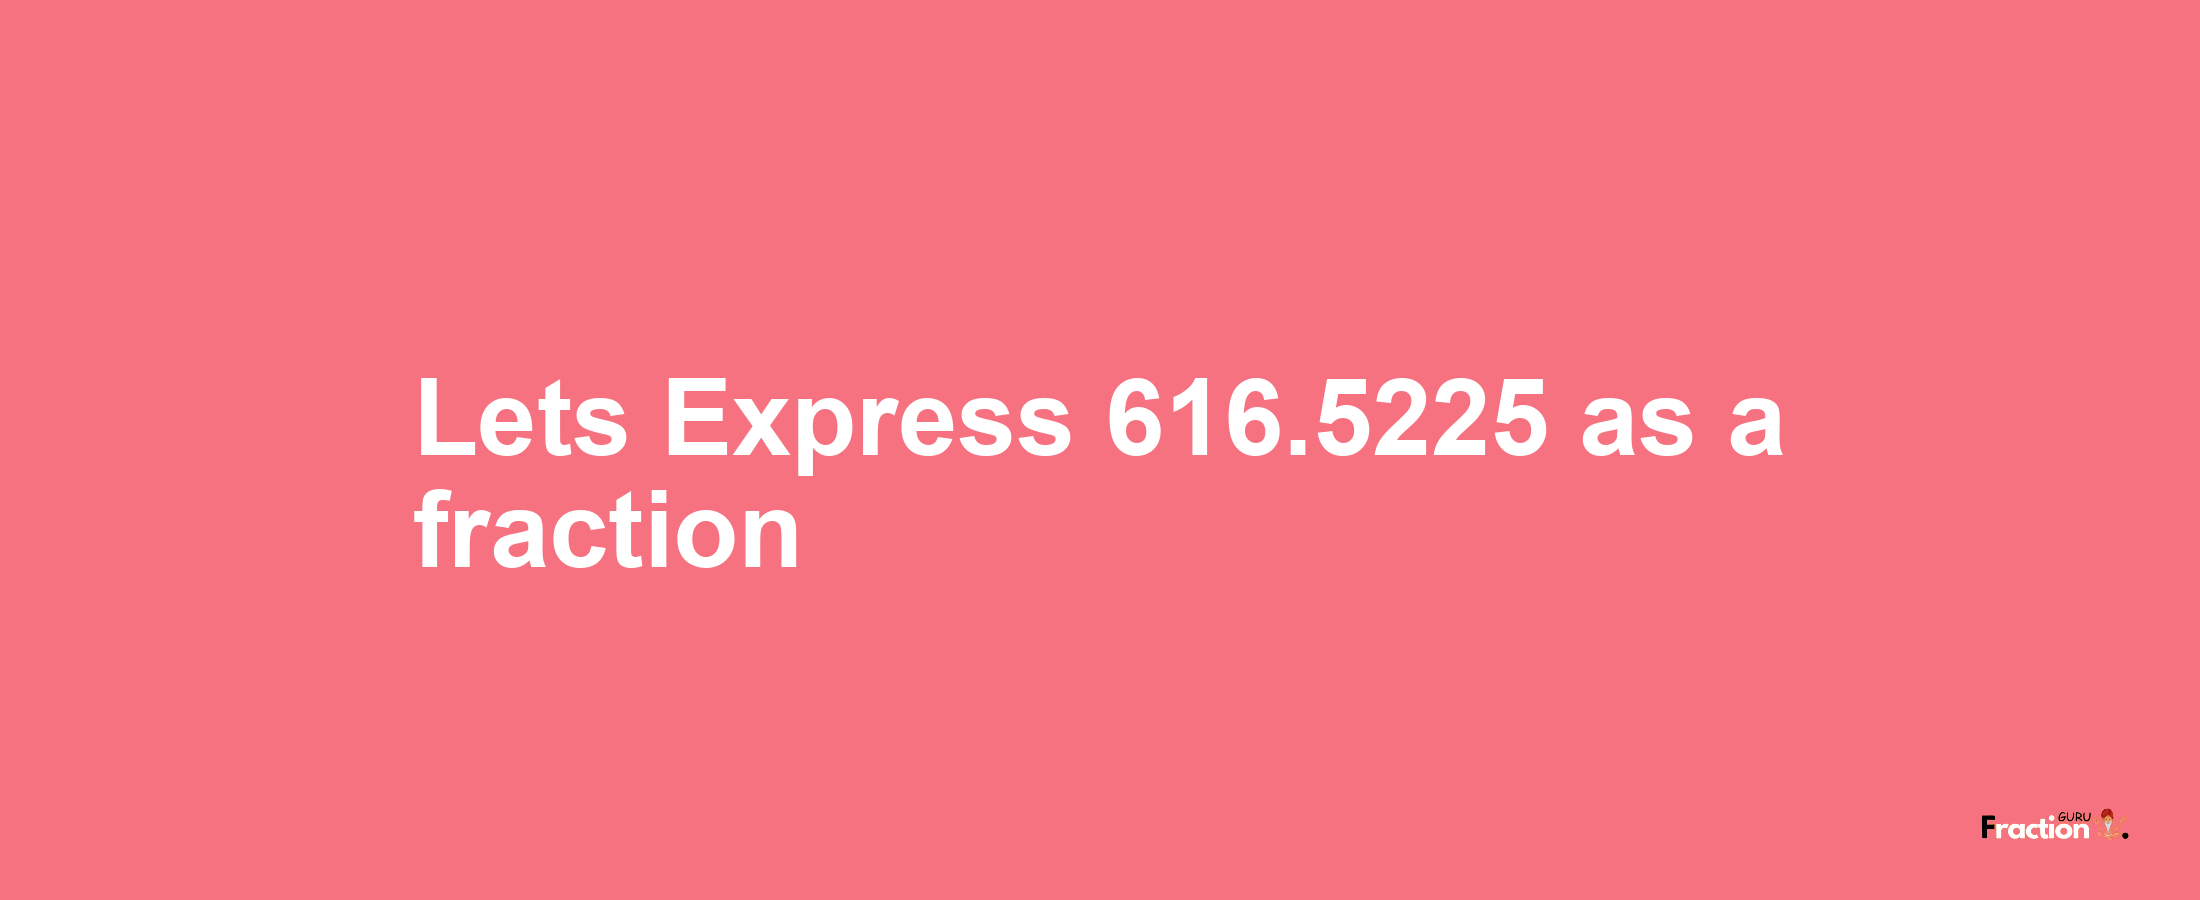 Lets Express 616.5225 as afraction